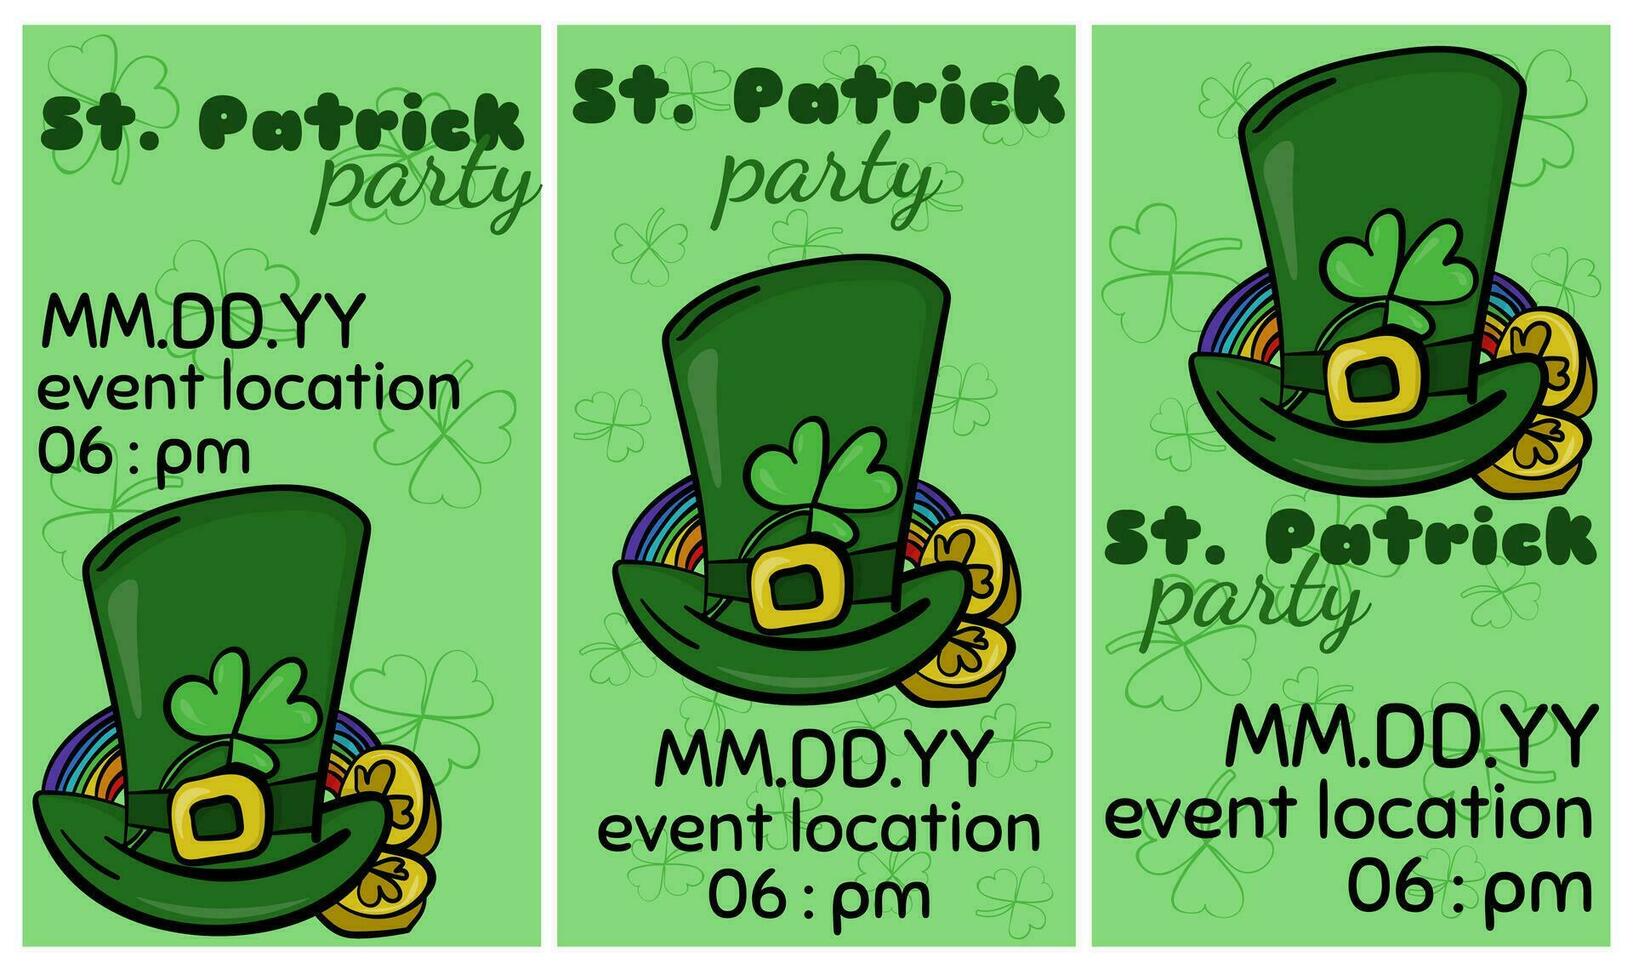 St. Patrick's Day party,  set of vertical format flyers or invitations in cartoon style vector